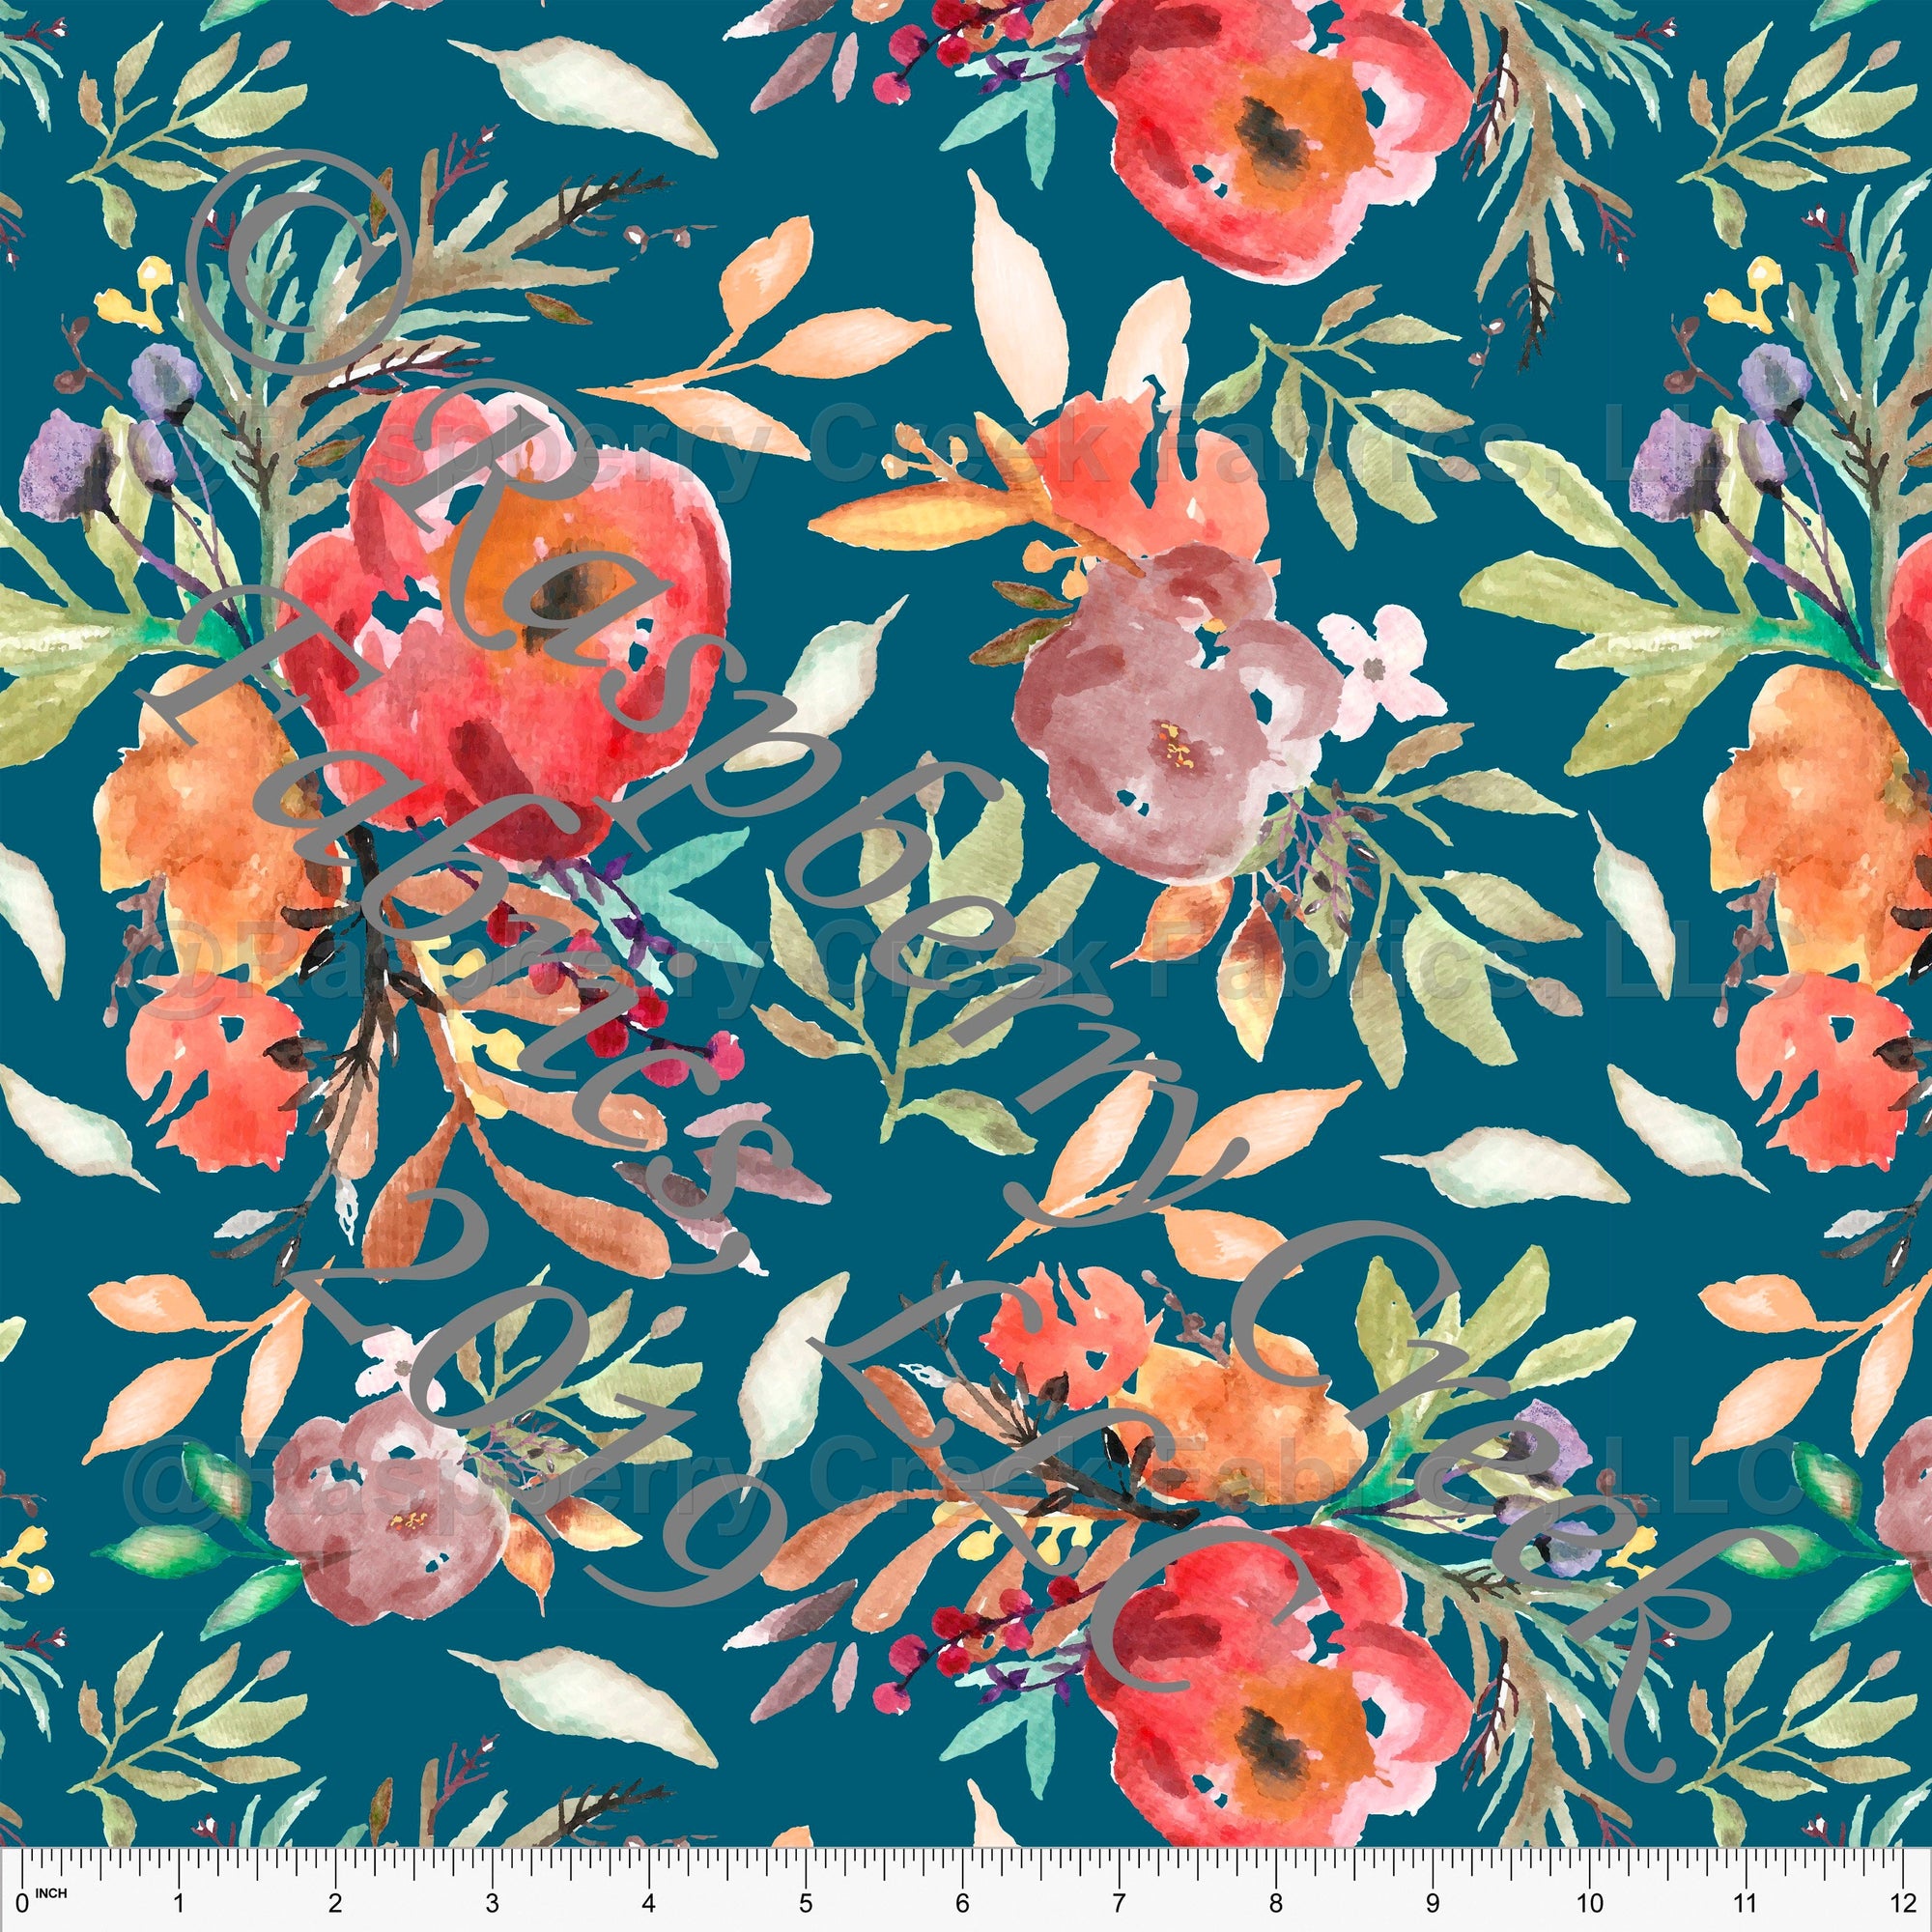 Teal Red Coral Orange and Green Watercolor Floral Rayon Challis, By Elise Peterson for CLUB Fabrics Fabric, Raspberry Creek Fabrics, watermarked